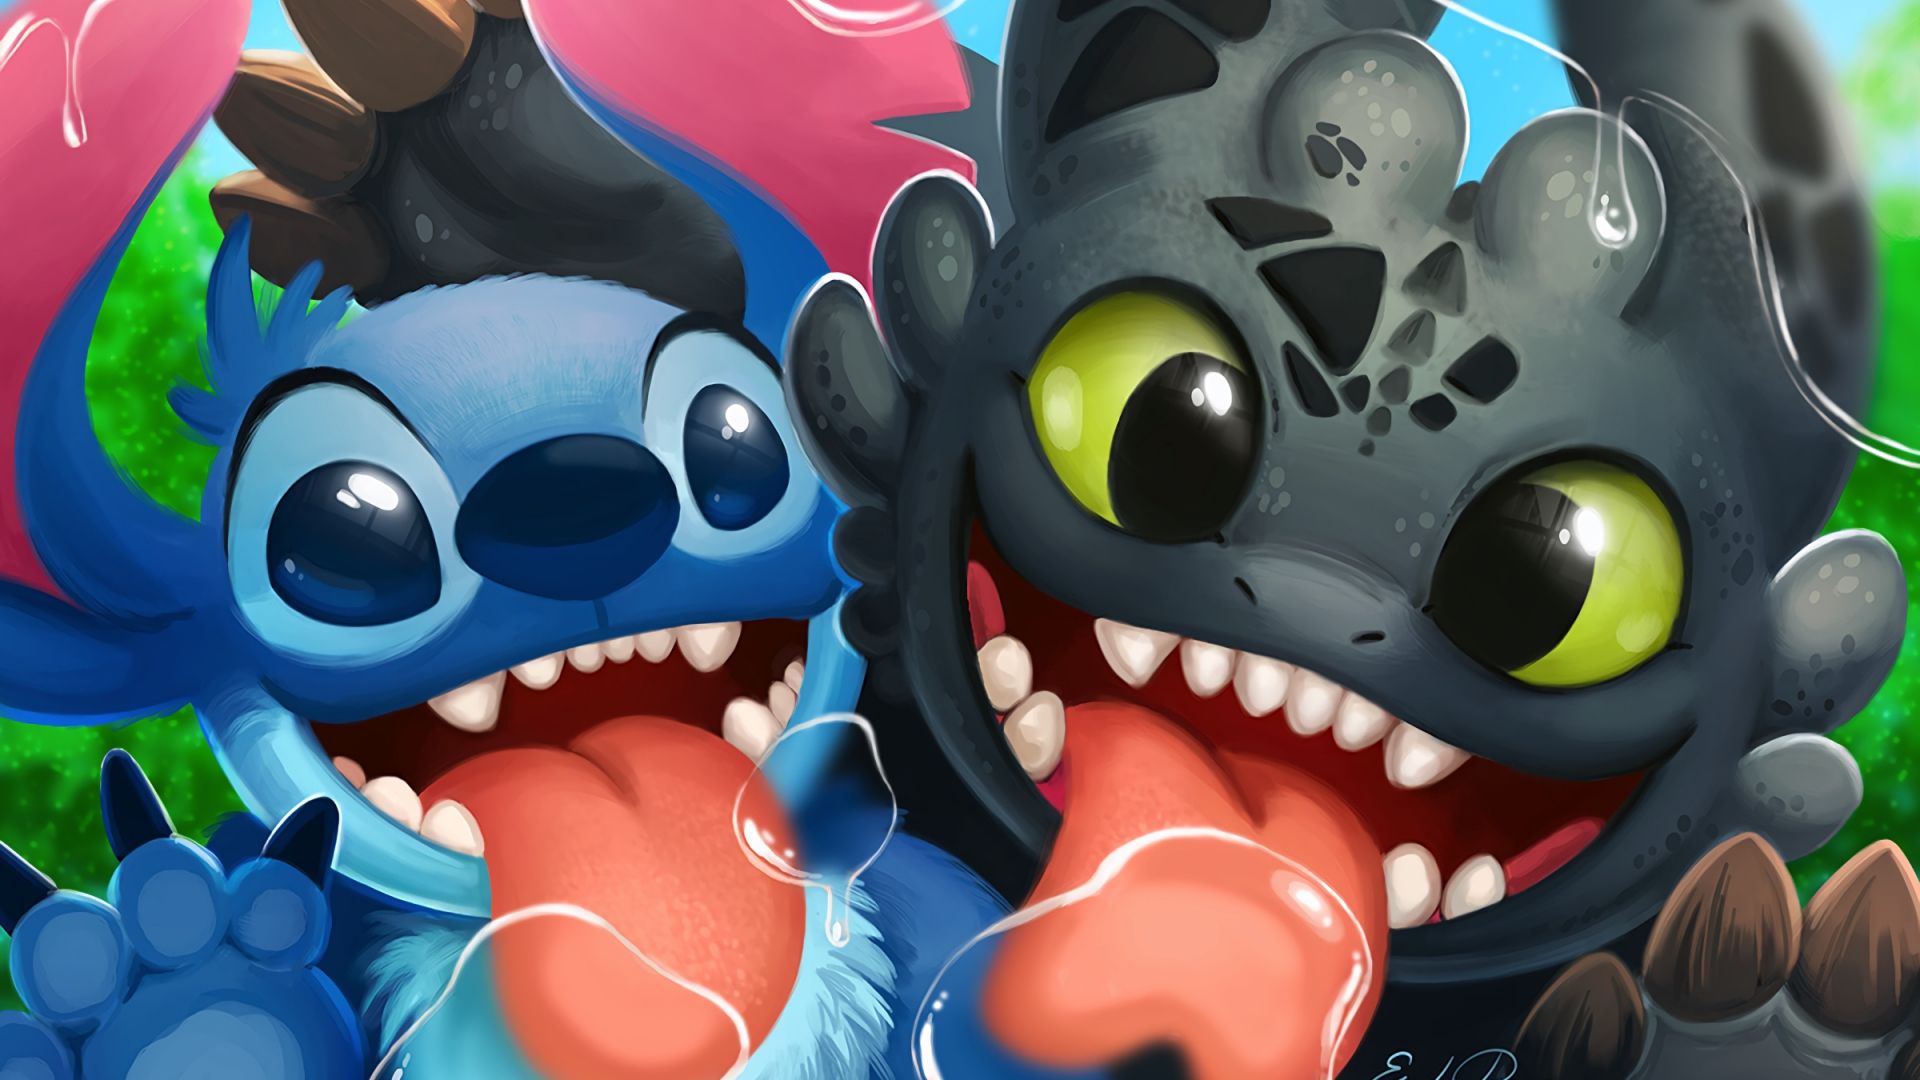 Wallpaper Stitch, Lilo And Stitch, Toothless, How To HD Wallpaper